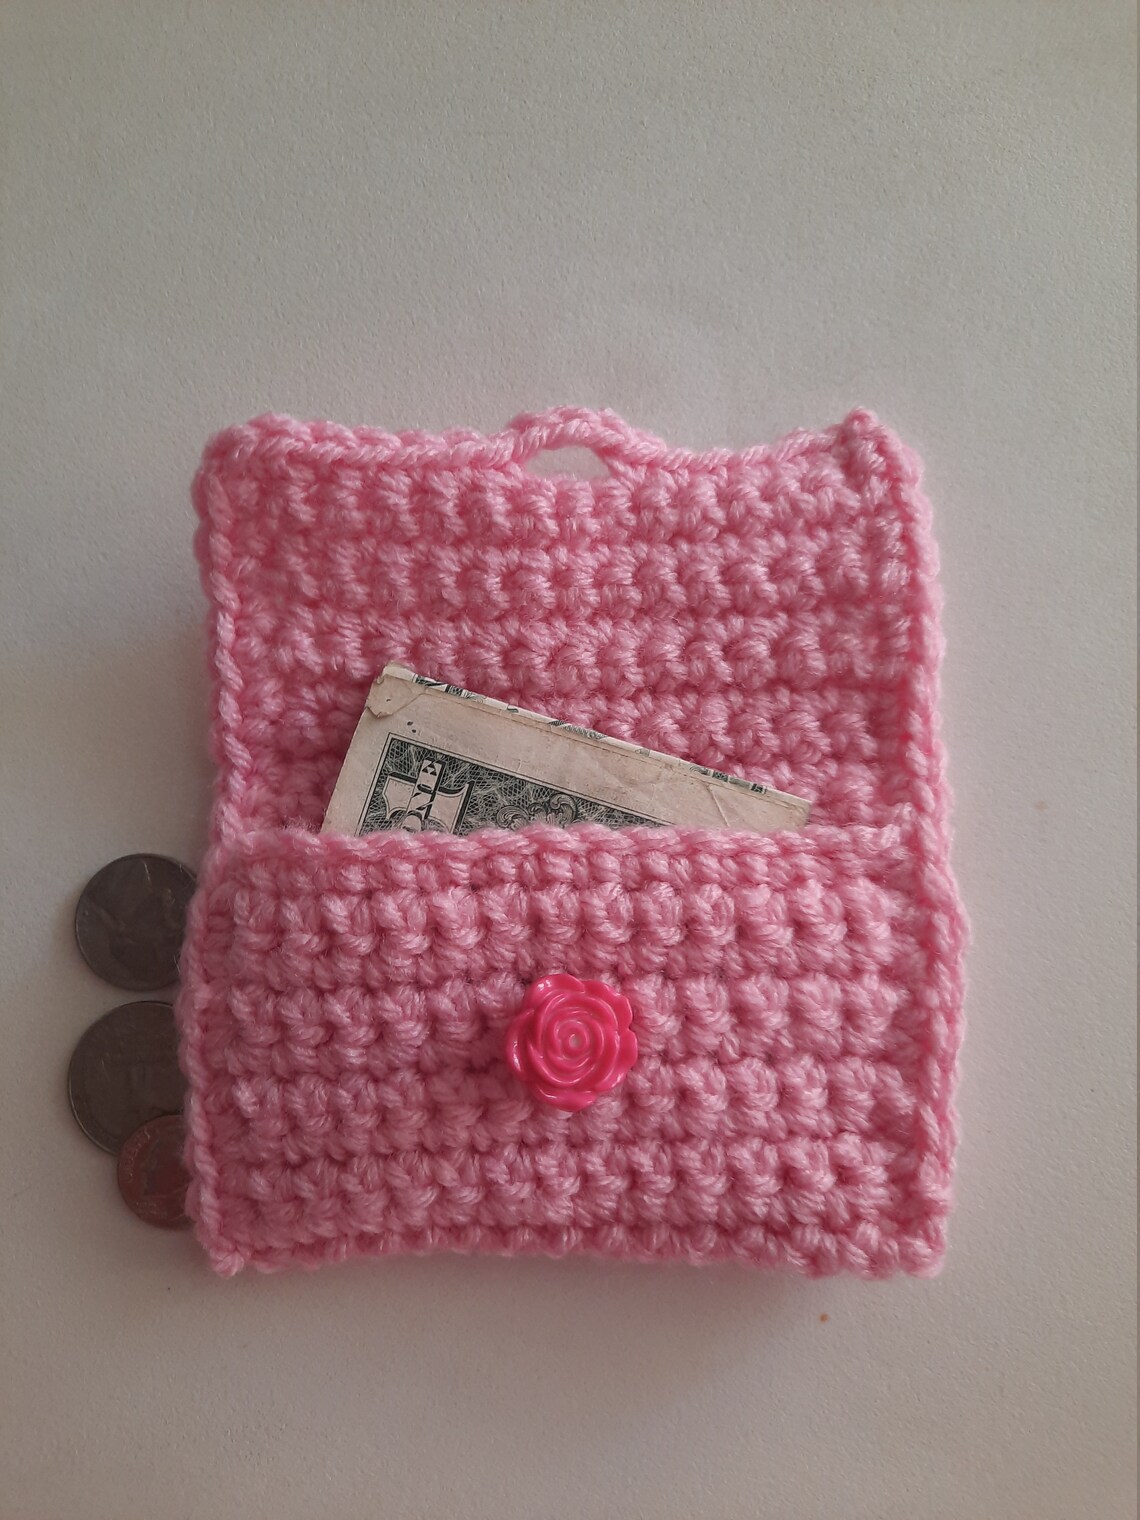 Crochet Coin Purse Money Holder Pink with RoseButton | Etsy